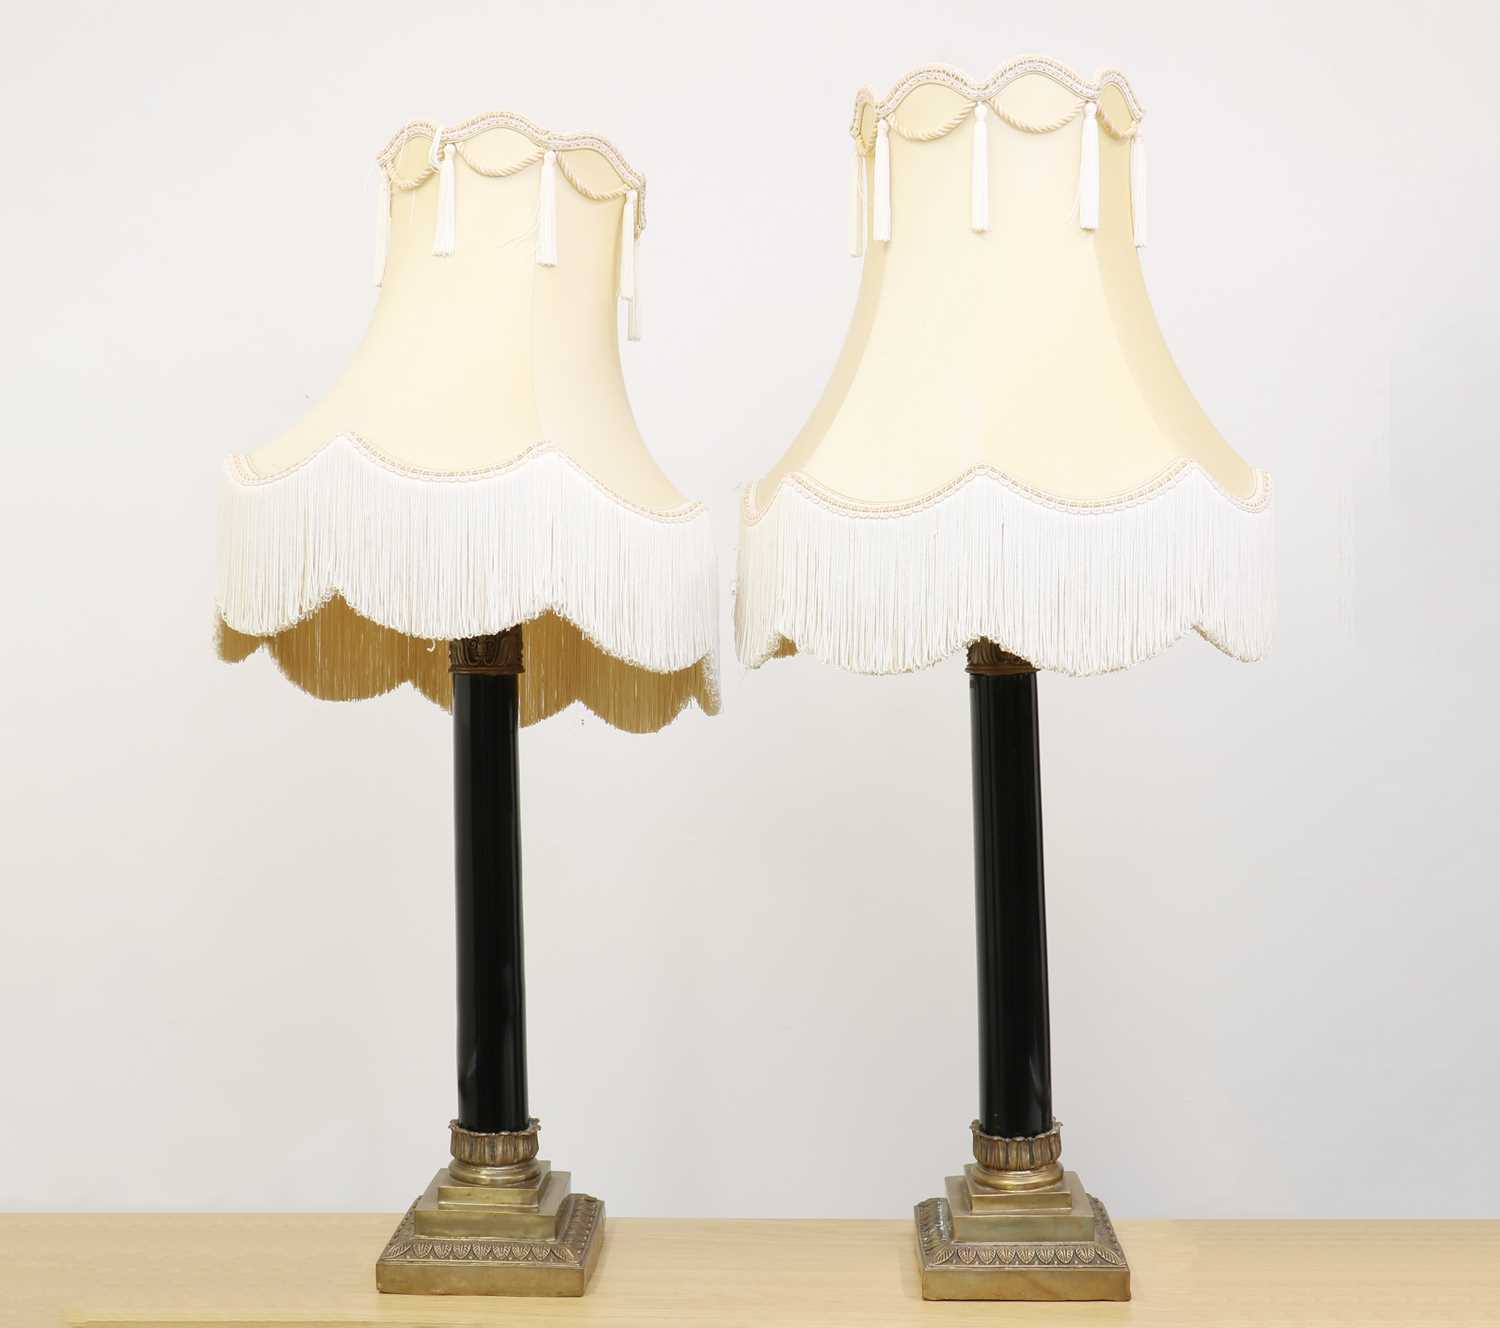 A pair of table lamps,